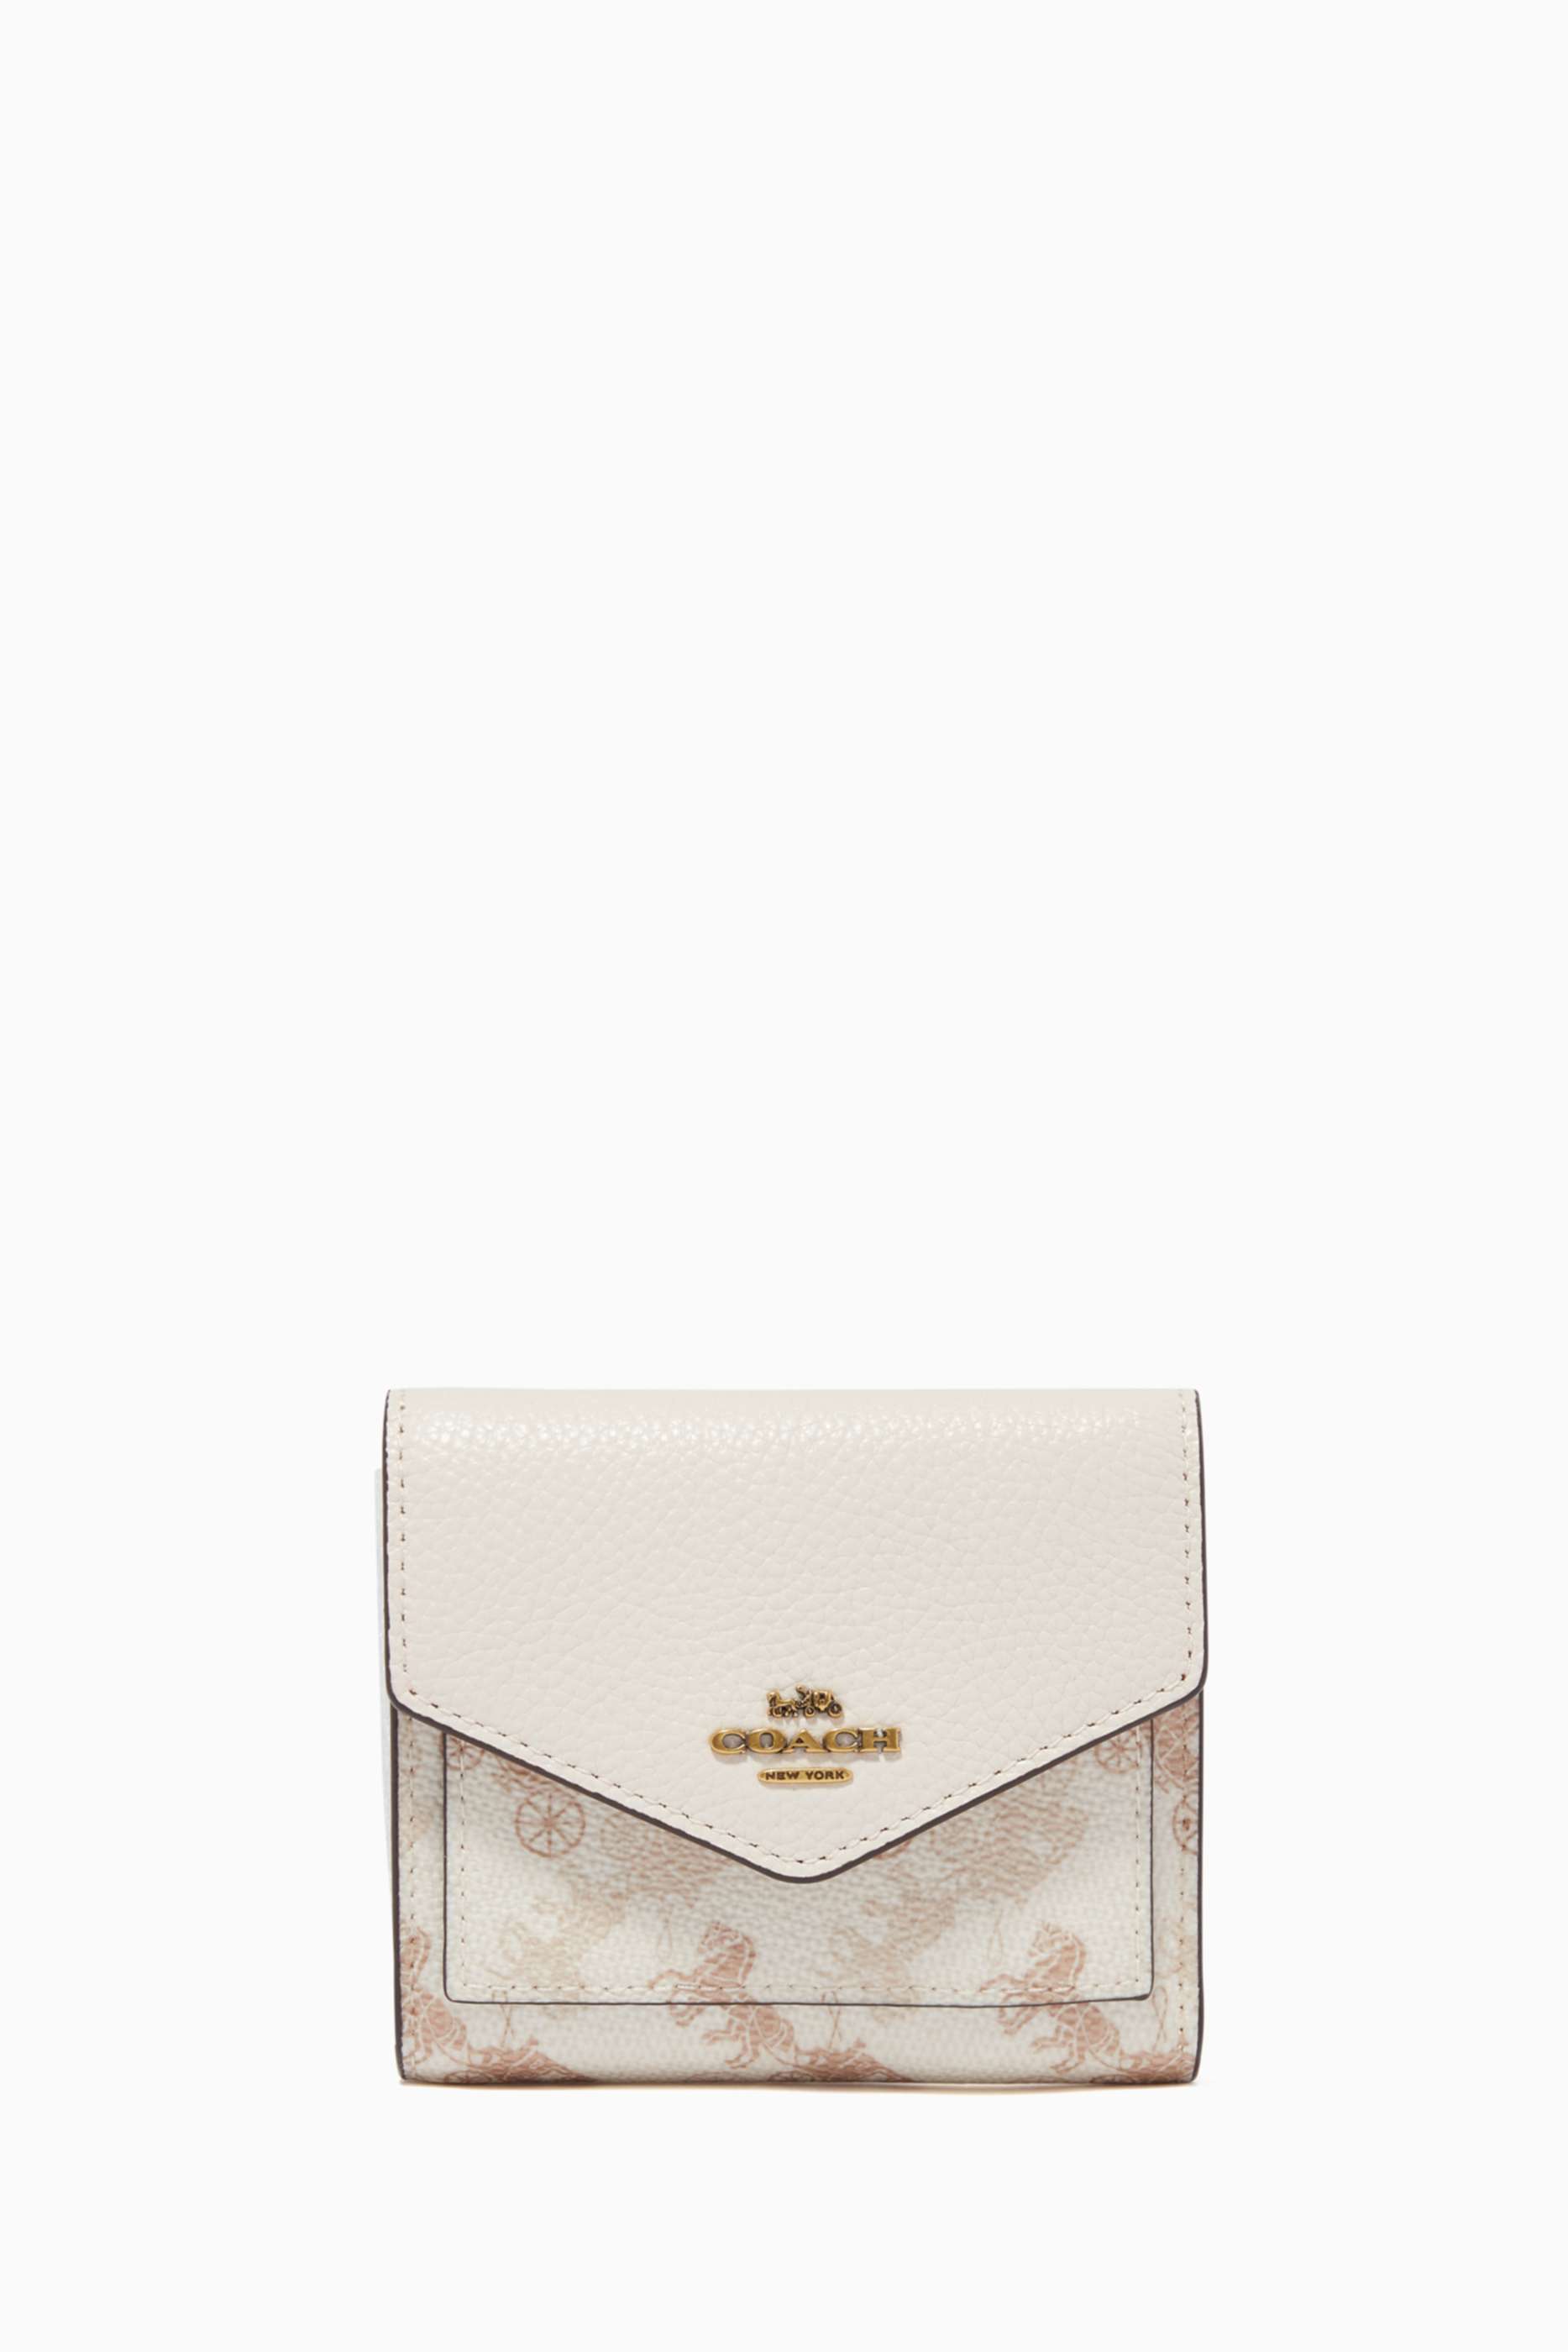 Shop Coach White Small Wallet with Horse & Carriage Print for 